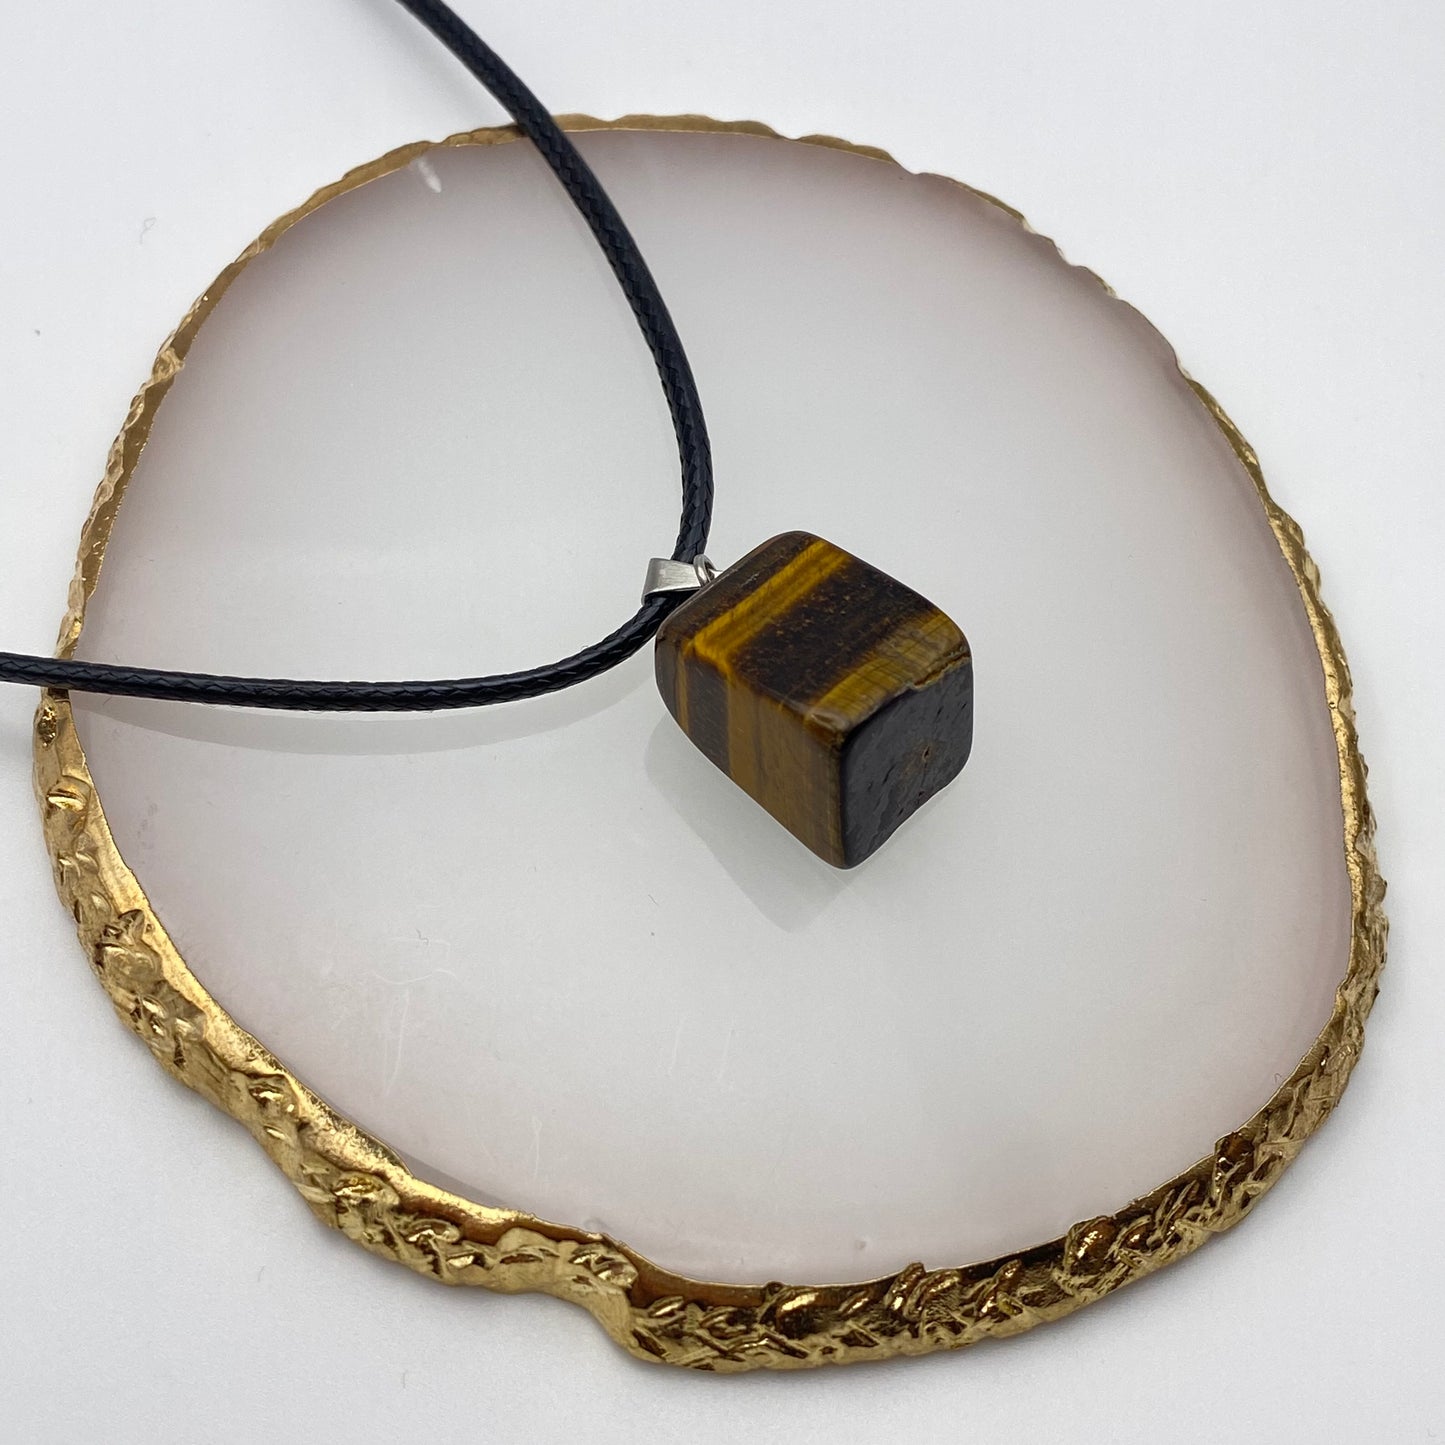 Tigers Eye Crystal Chunk Necklace on Black Cord